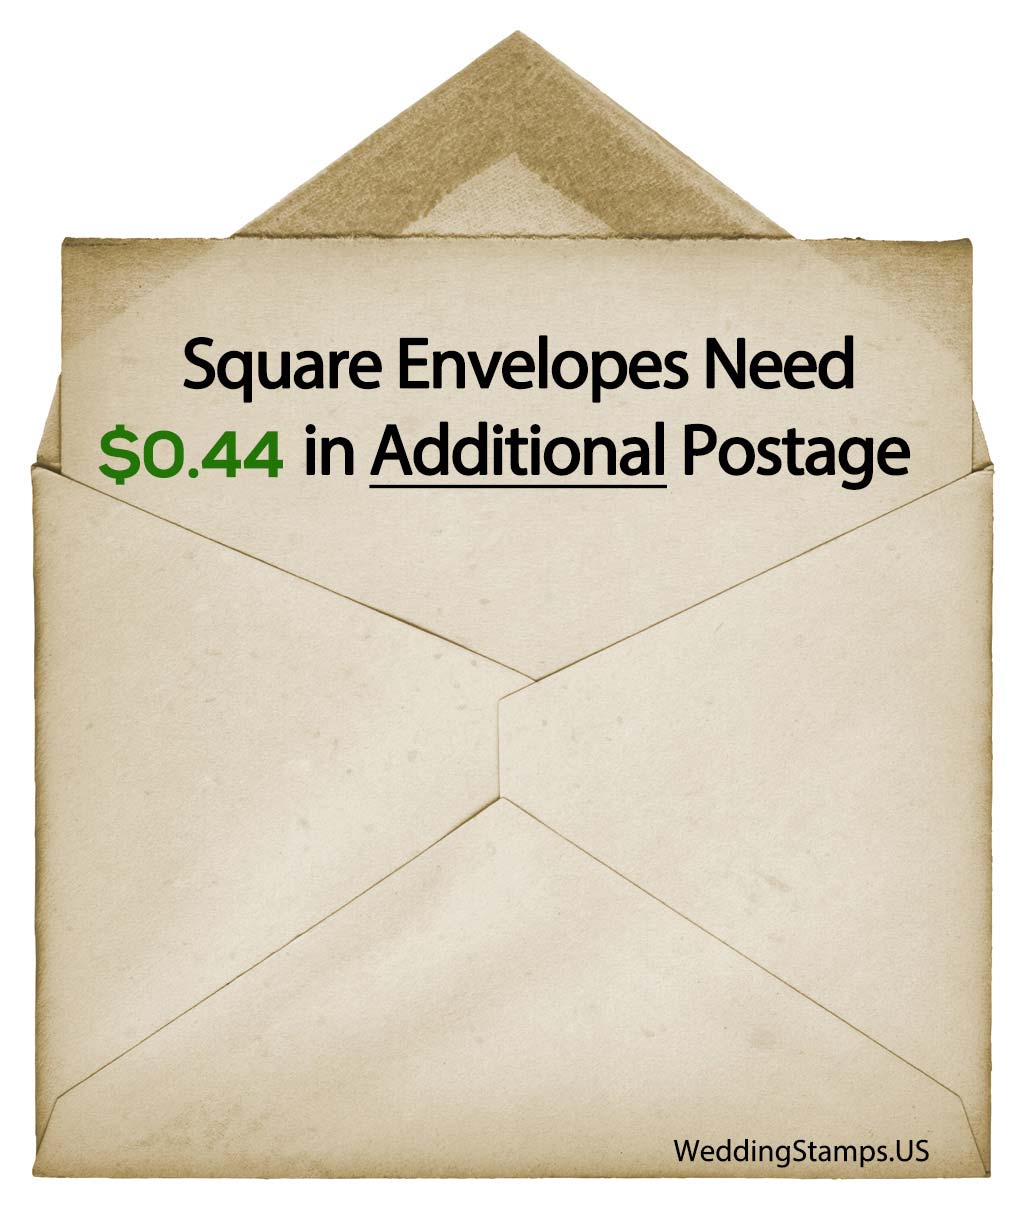 Square Envelopes Require Additional Postage